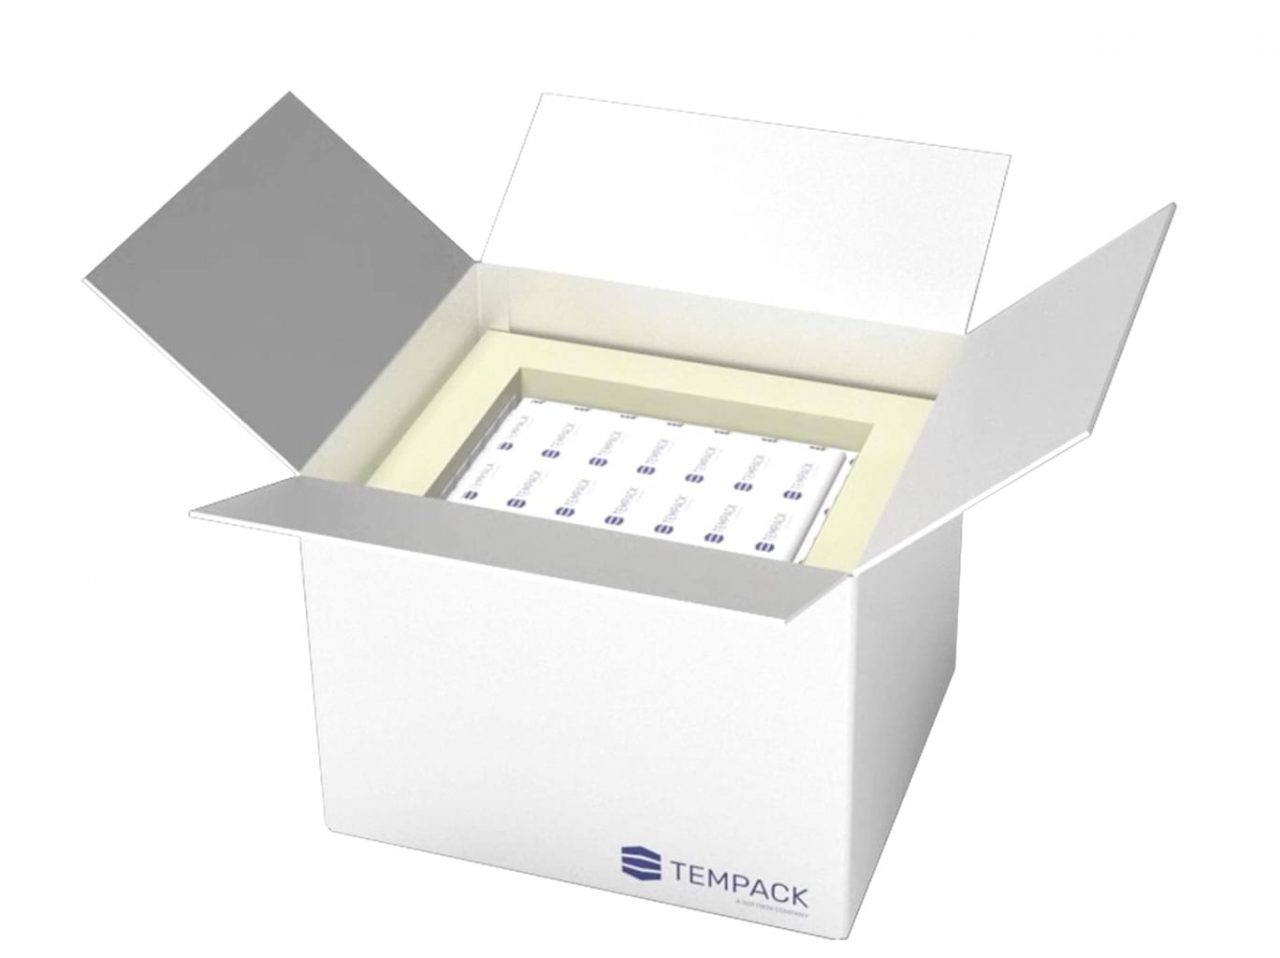 tempack-prequalified-solutions-biotech-72-3@2x-1280x958